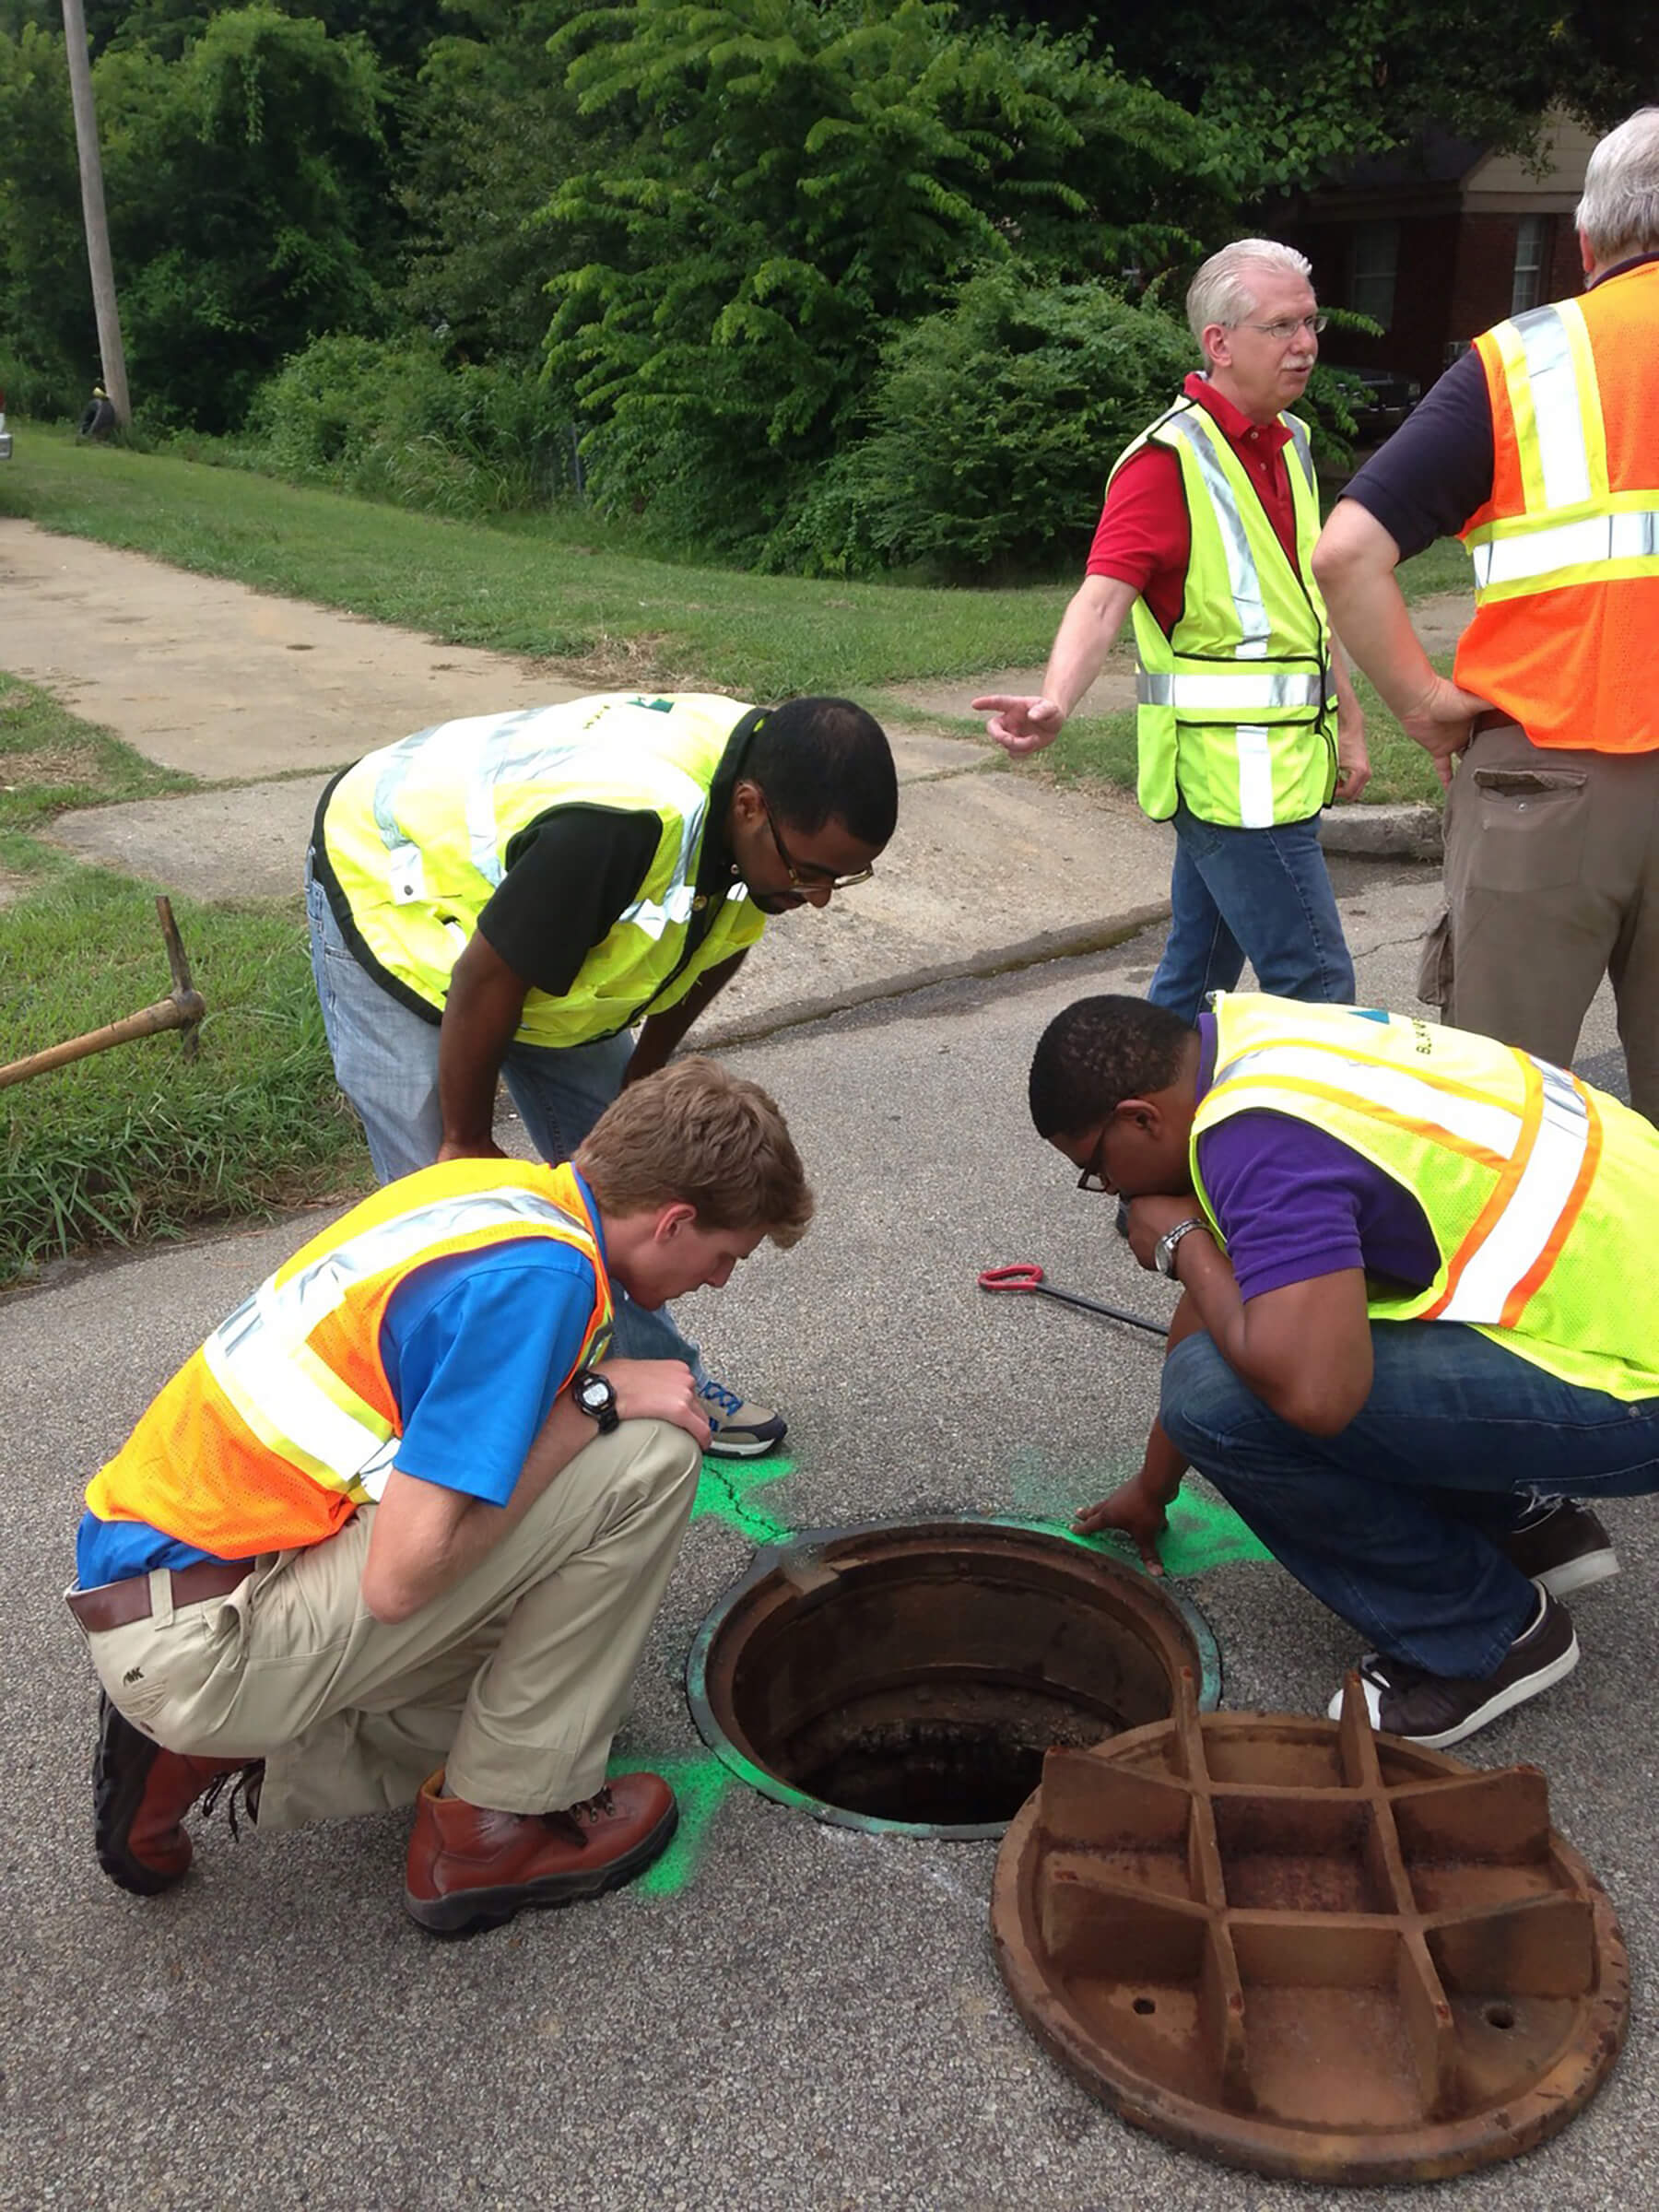 A group of workers in reflective vests looking down a manhole.